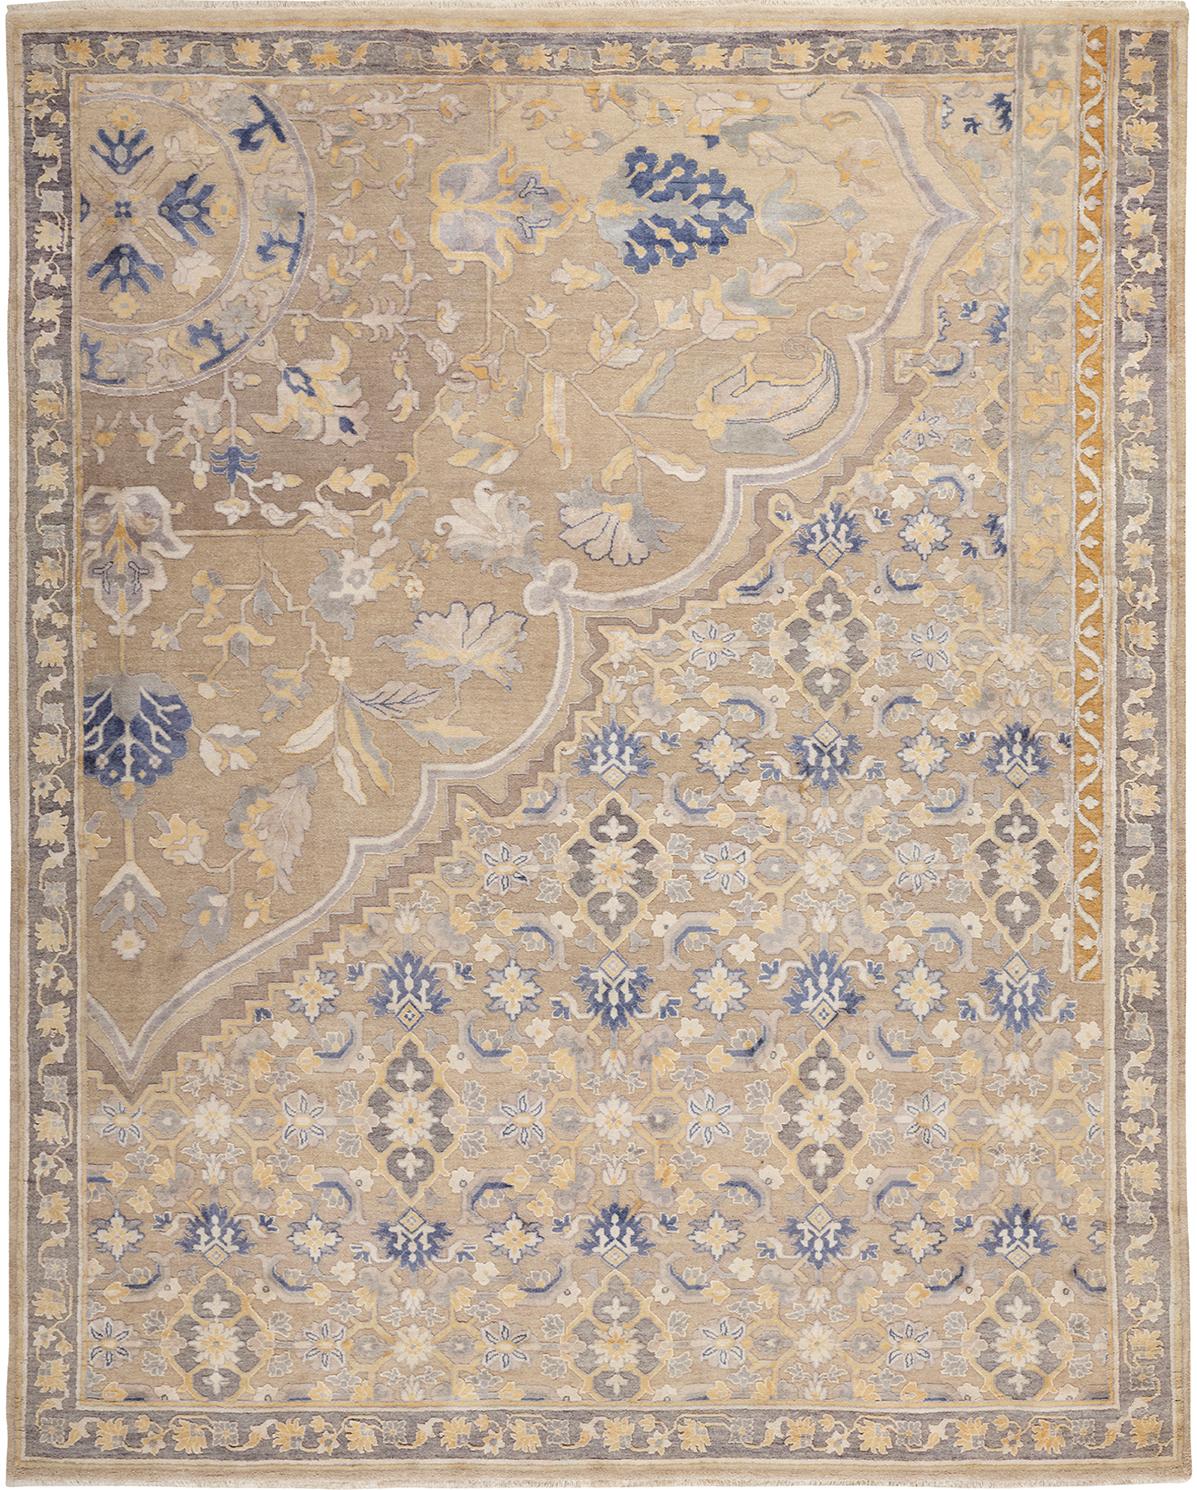 While originally woven by nomadic Bakhtiari, most authentic Bakhtiari rugs are woven in
Bakhtiari settled communities in west central Iran. Patterns are usually floral or garden
inspired. The Khesti, an established garden motif, is perhaps the most